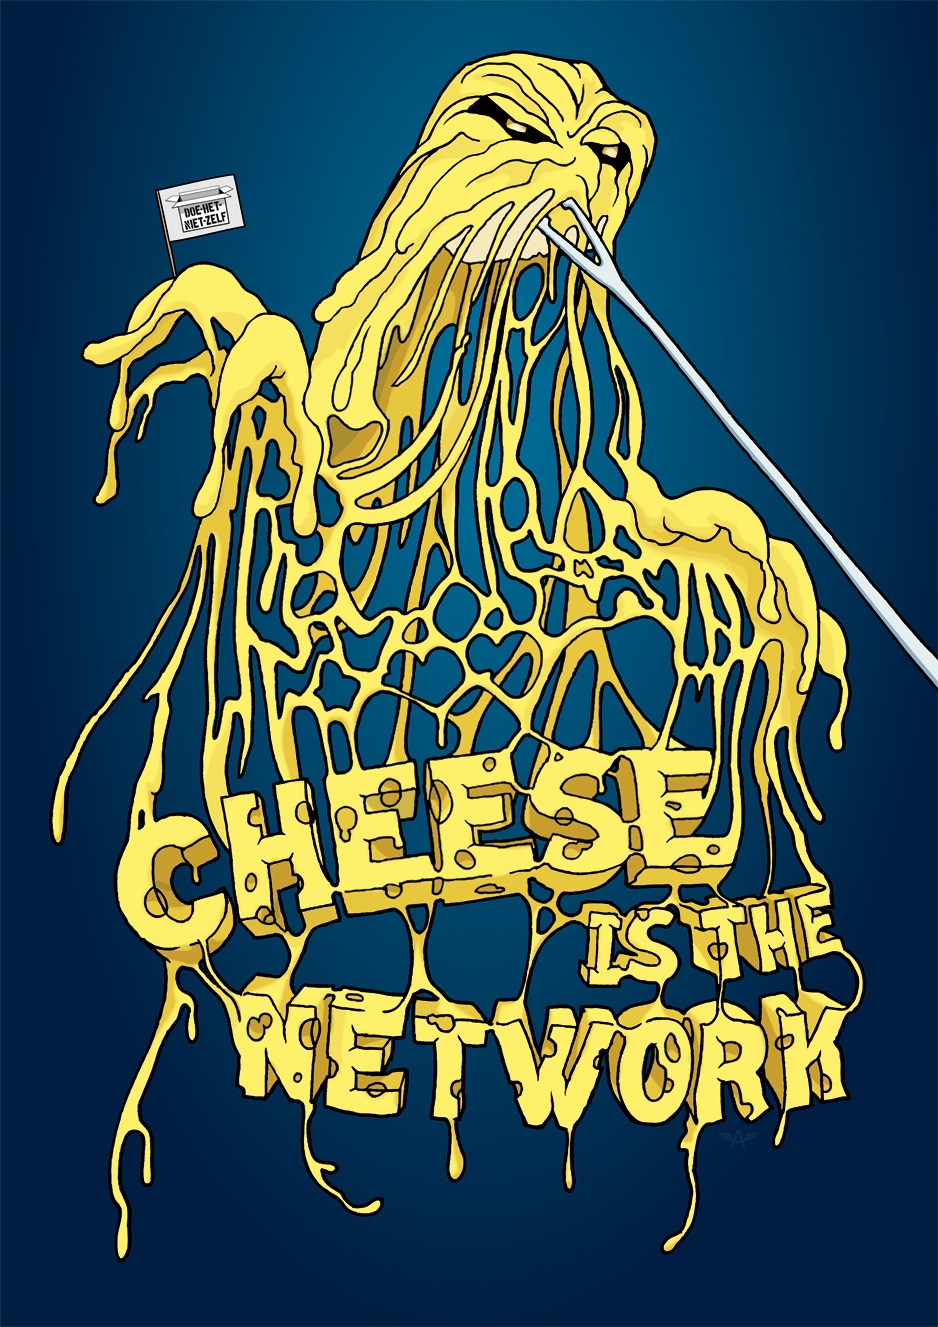 Cheese is network